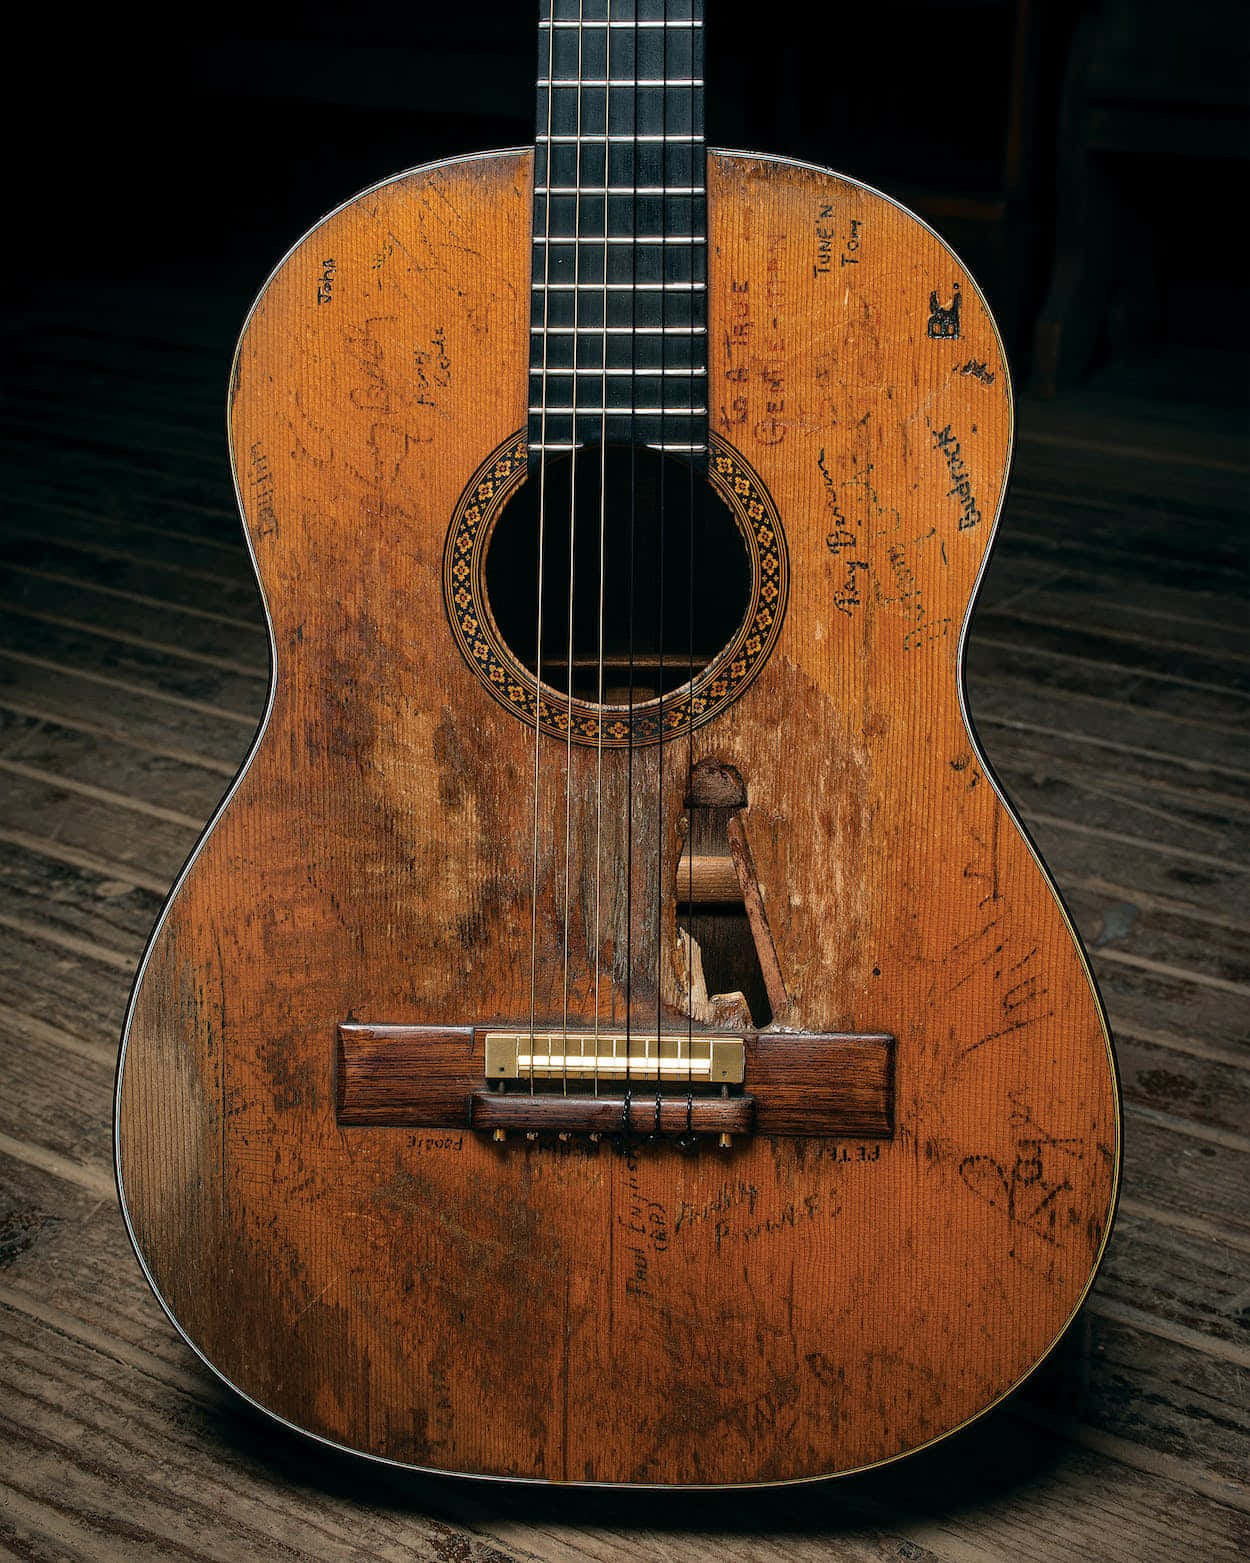 The perfect companion to a musician:  An acoustic guitar.